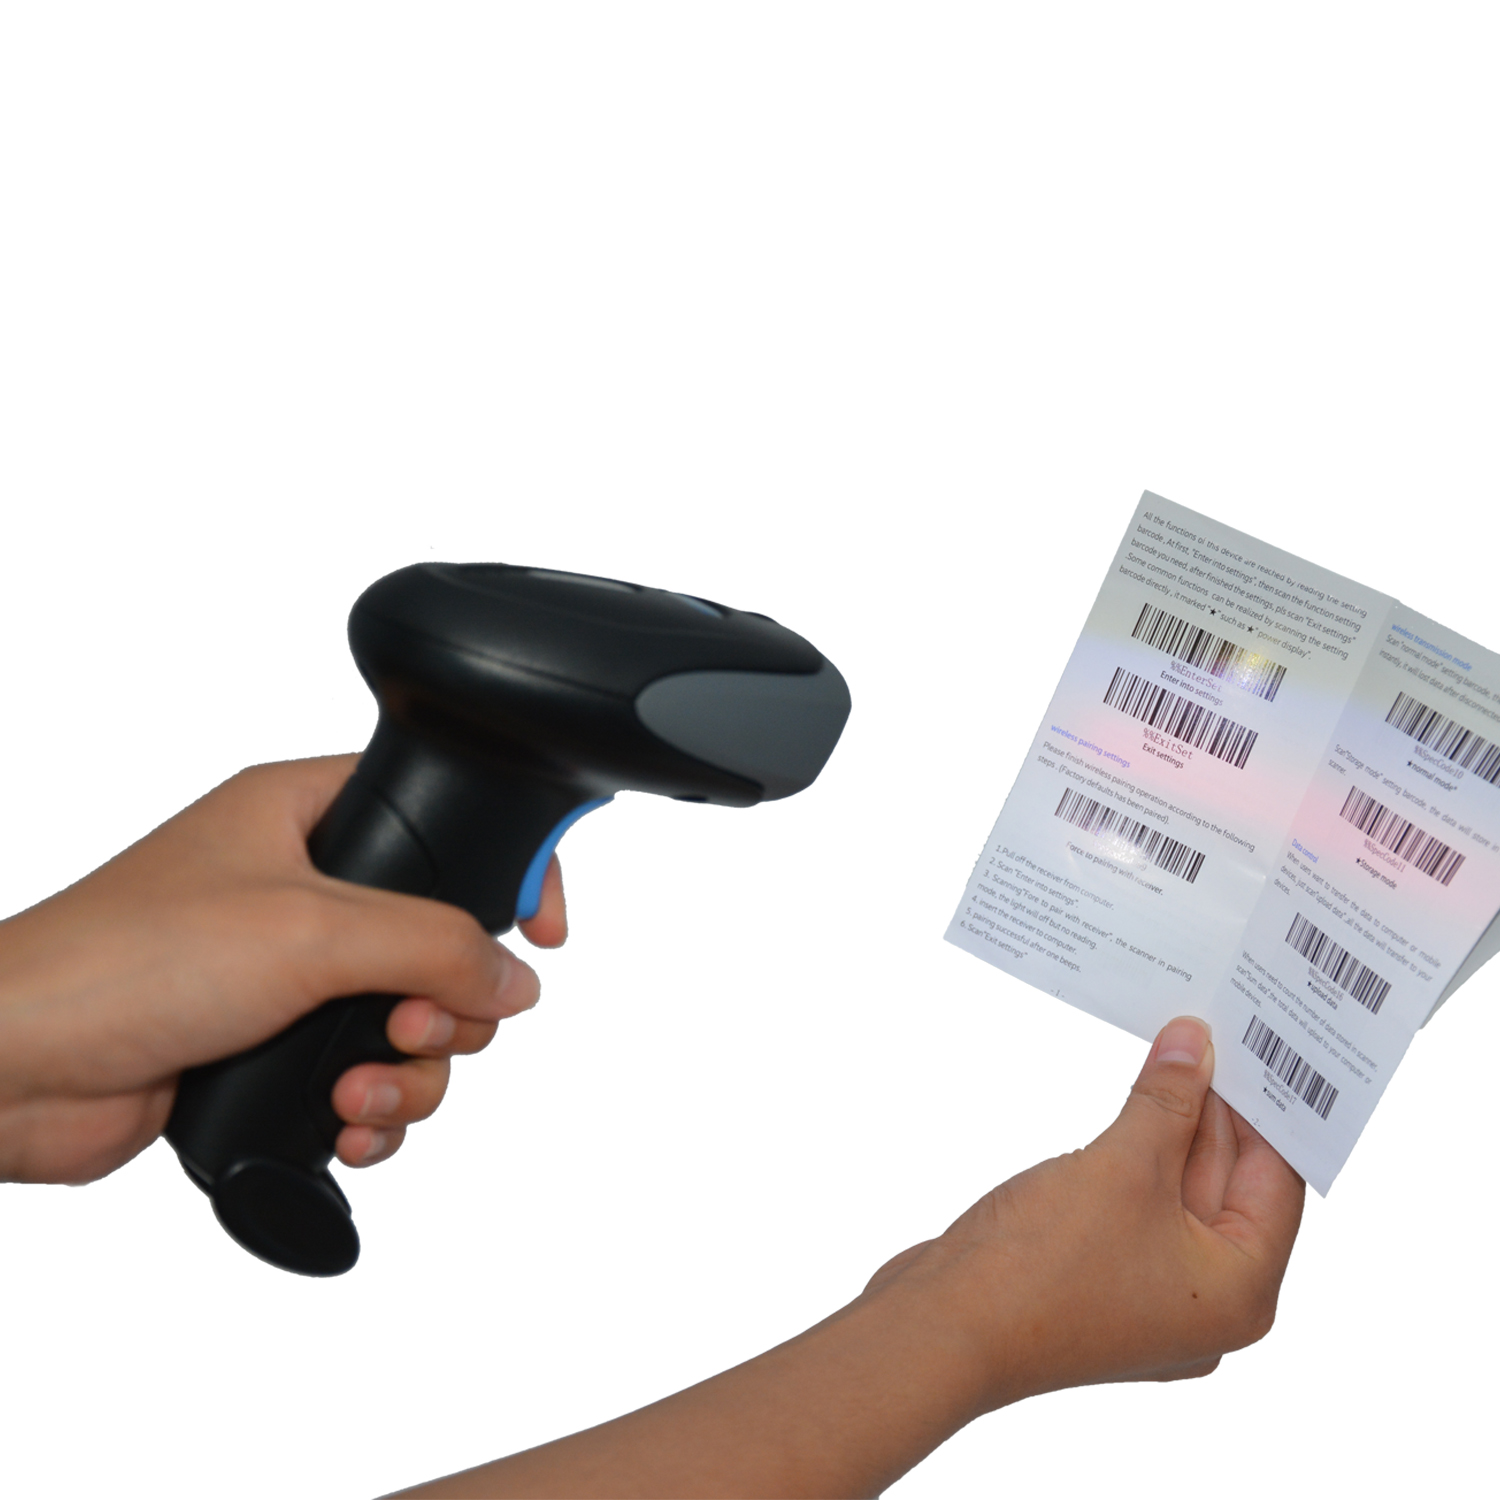 2.4GHz ROHS Wireless 2D Barcode Scanner For Mobile Payment HM400S